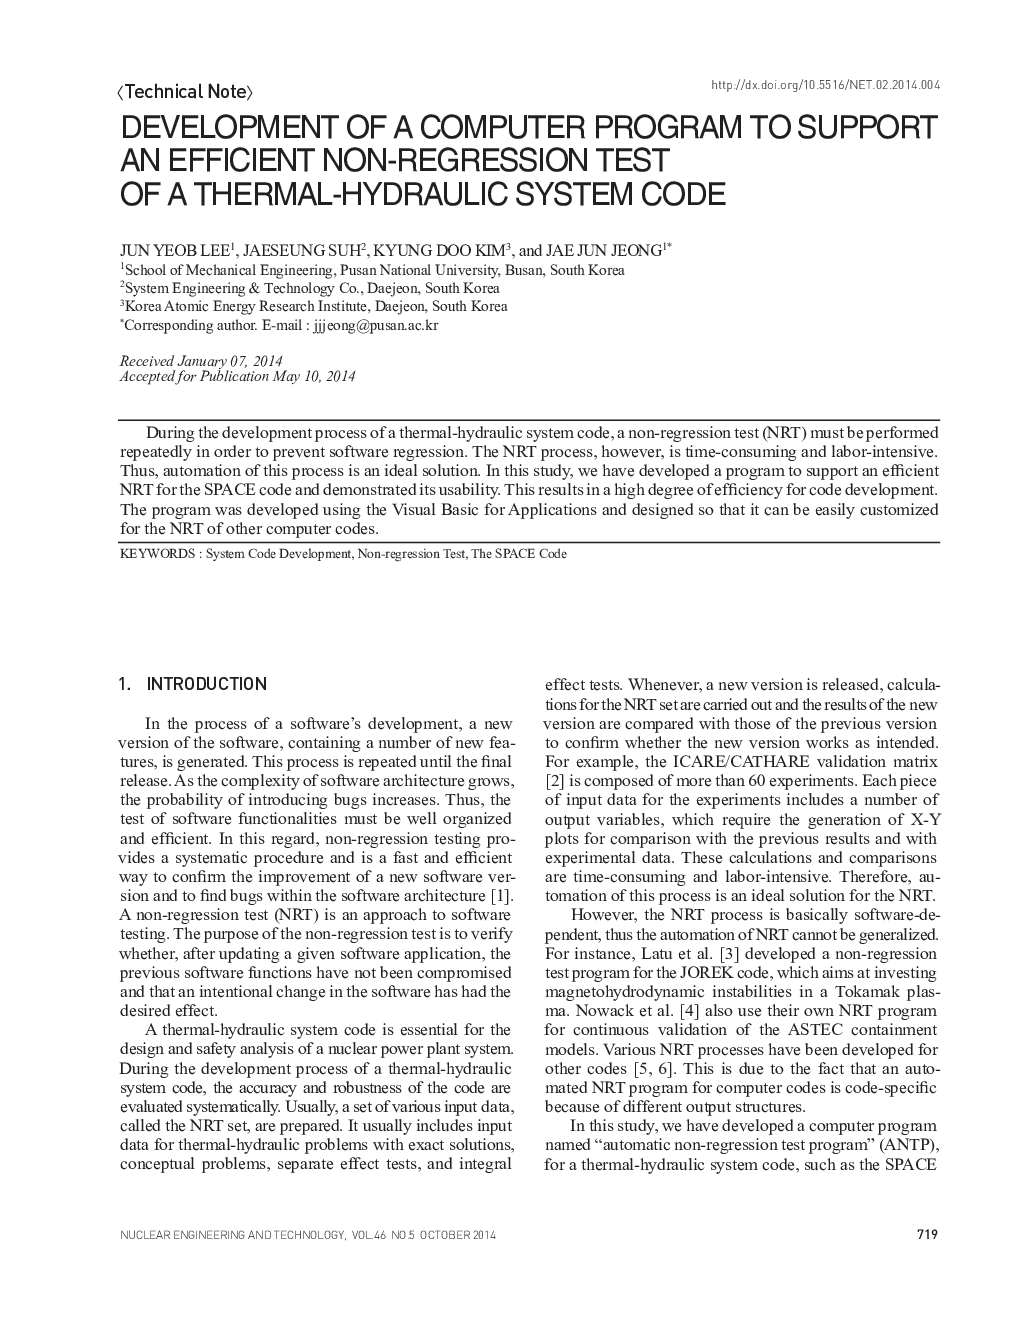 DEVELOPMENT OF A COMPUTER PROGRAM TO SUPPORT AN EFFICIENT NON-REGRESSION TEST OF A THERMAL-HYDRAULIC SYSTEM CODE